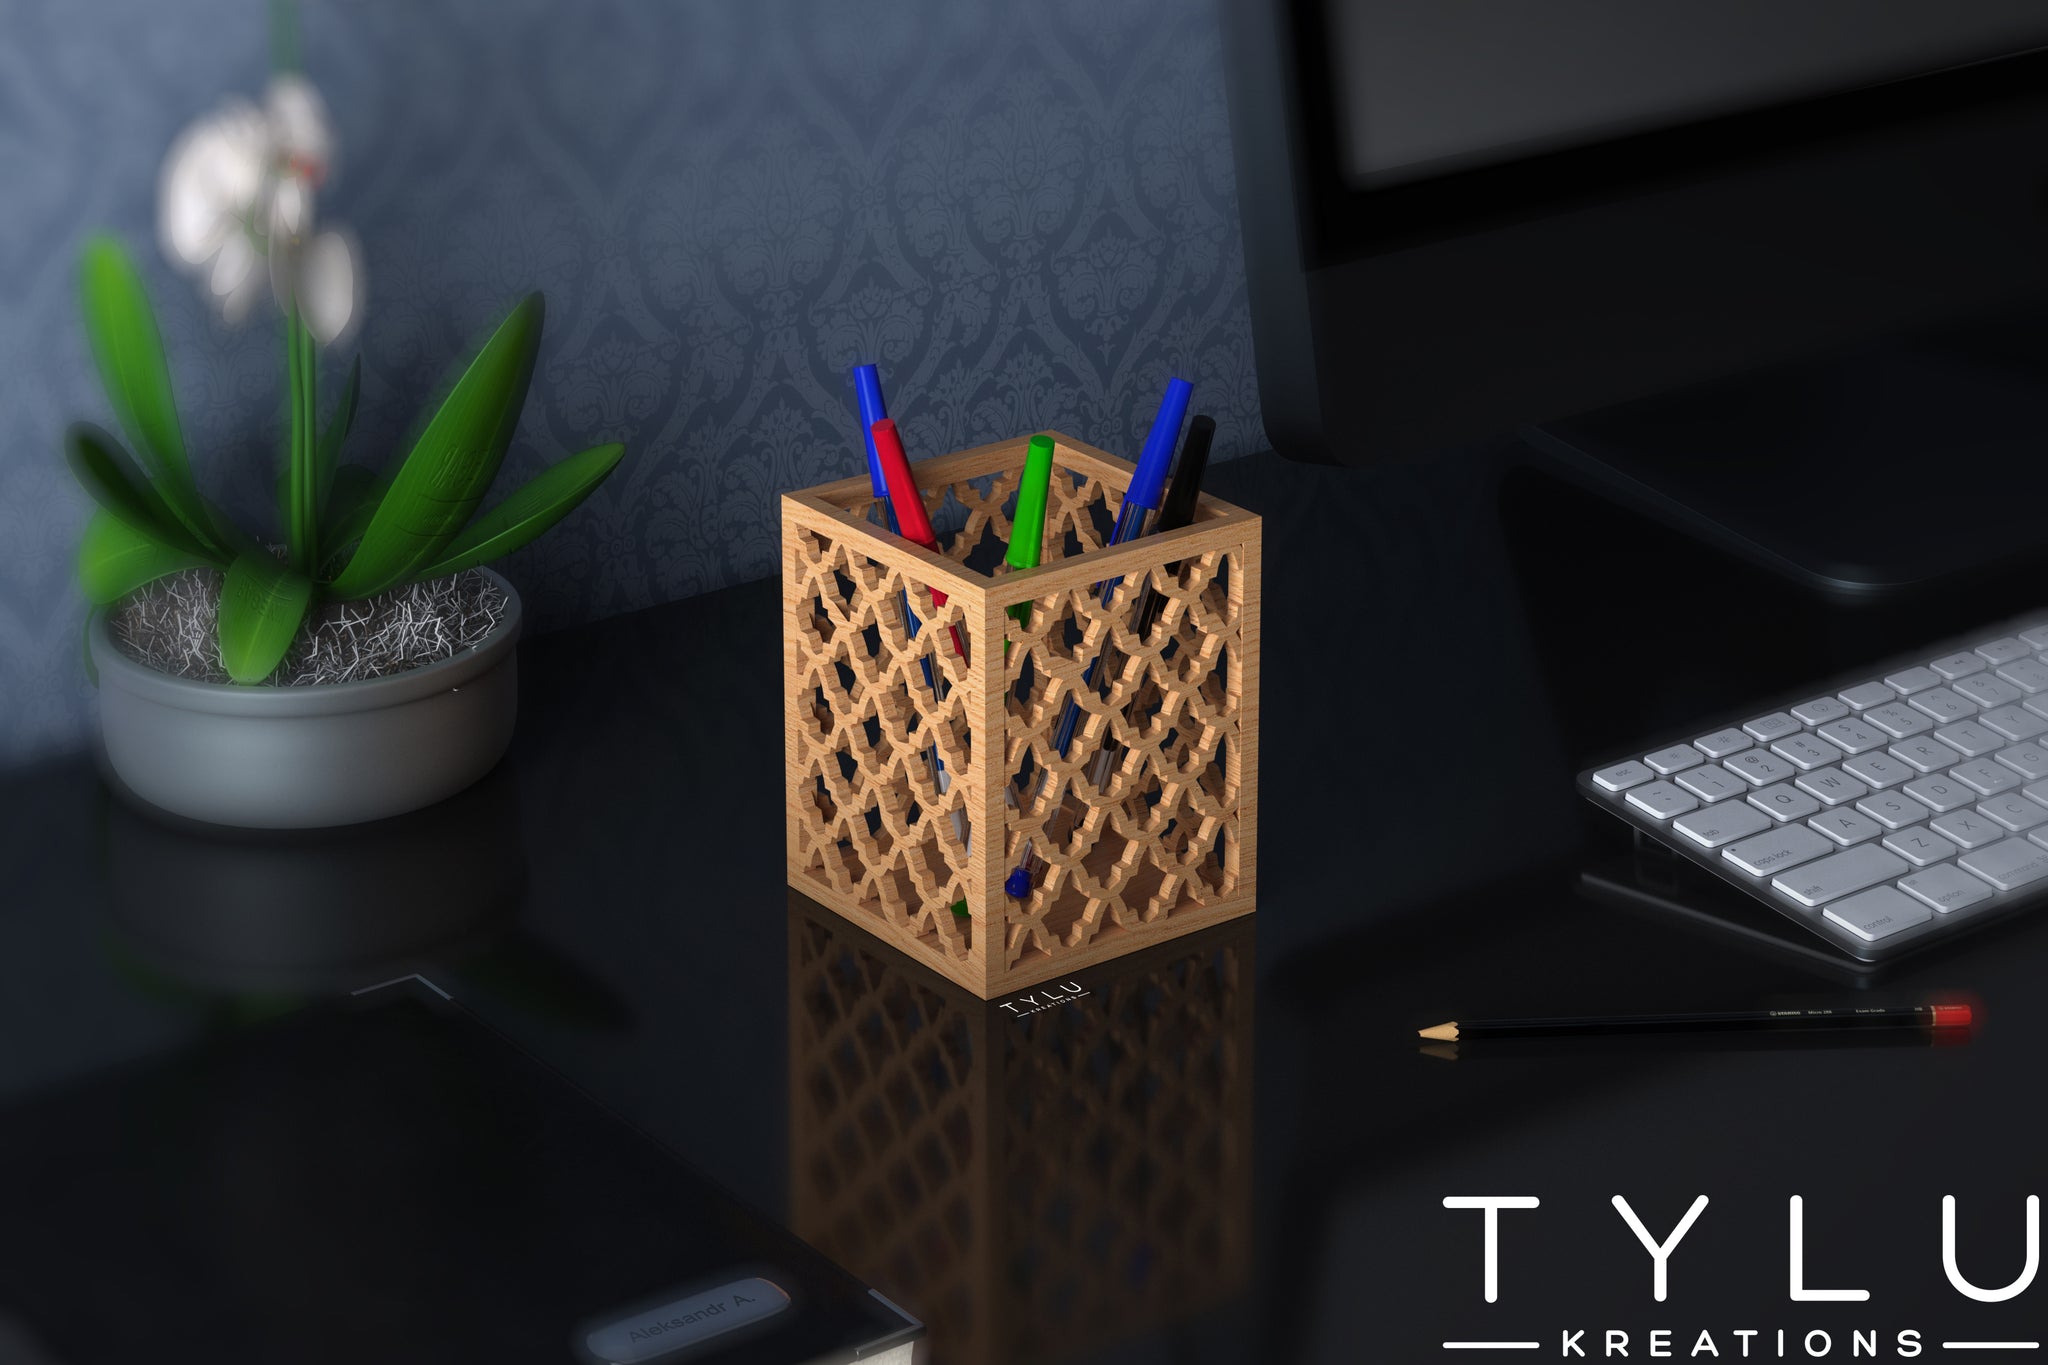 Patterned Pen Stand